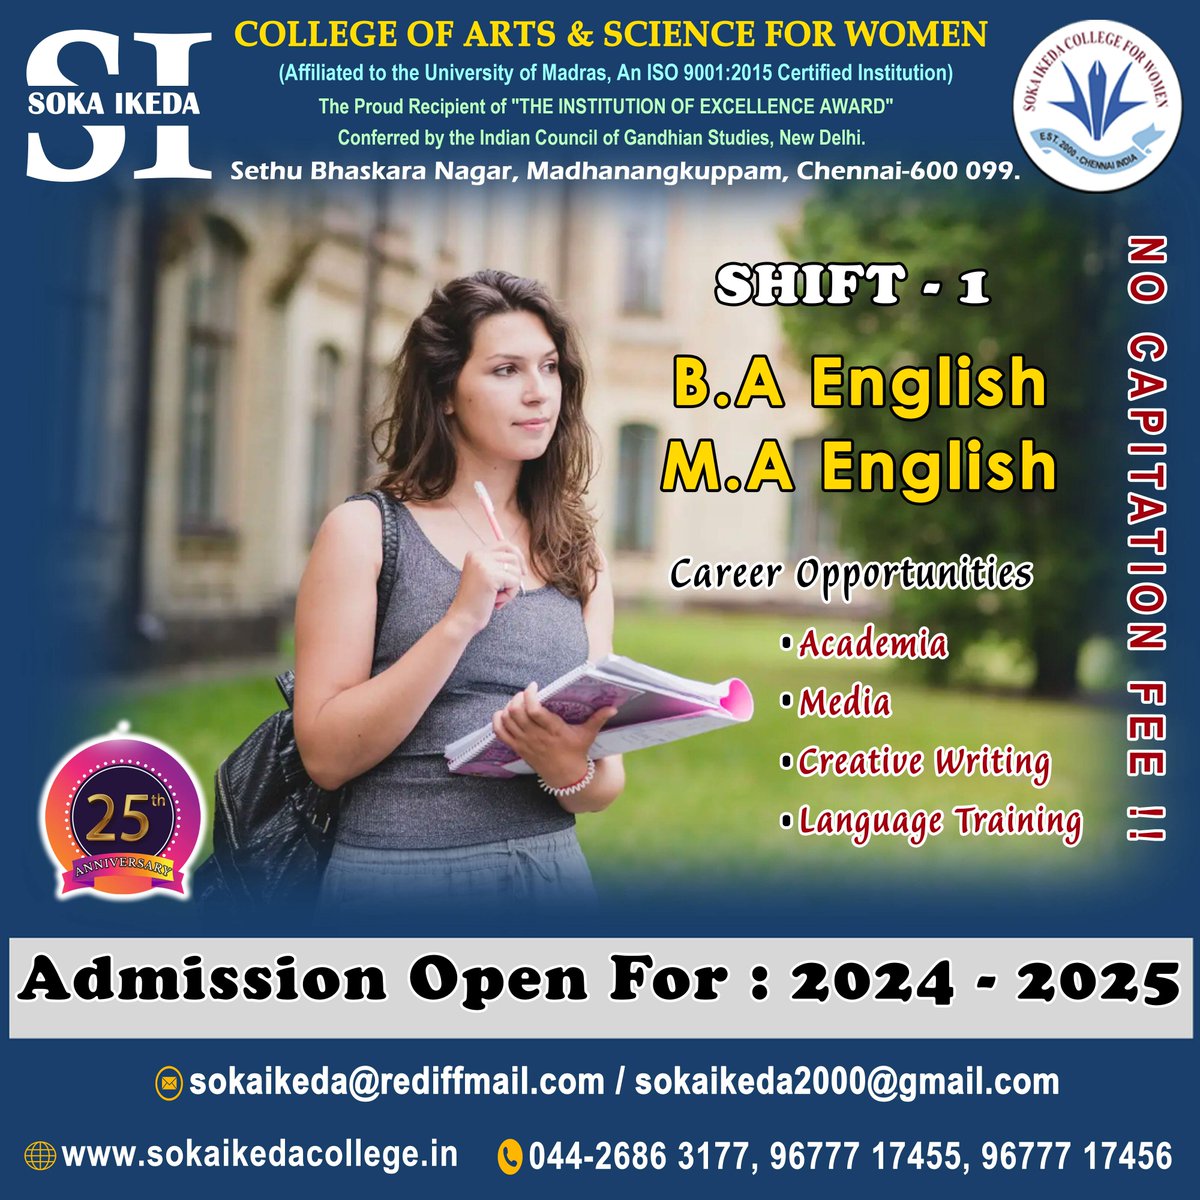 Admission Open 𝟐𝟎𝟐𝟒-𝟐𝟎𝟐𝟓
B.A and M.A English
Online Admission : sokaikedacollege.in/#/online-submi…
#BA #MA #BAEnglish #MAEnglish #admissionsopen2024 #careeropportunities #academia #media #creativewriting #languagetraining #courseoffered2024 #UG #PG #nocapitationfee #bestestinstitute